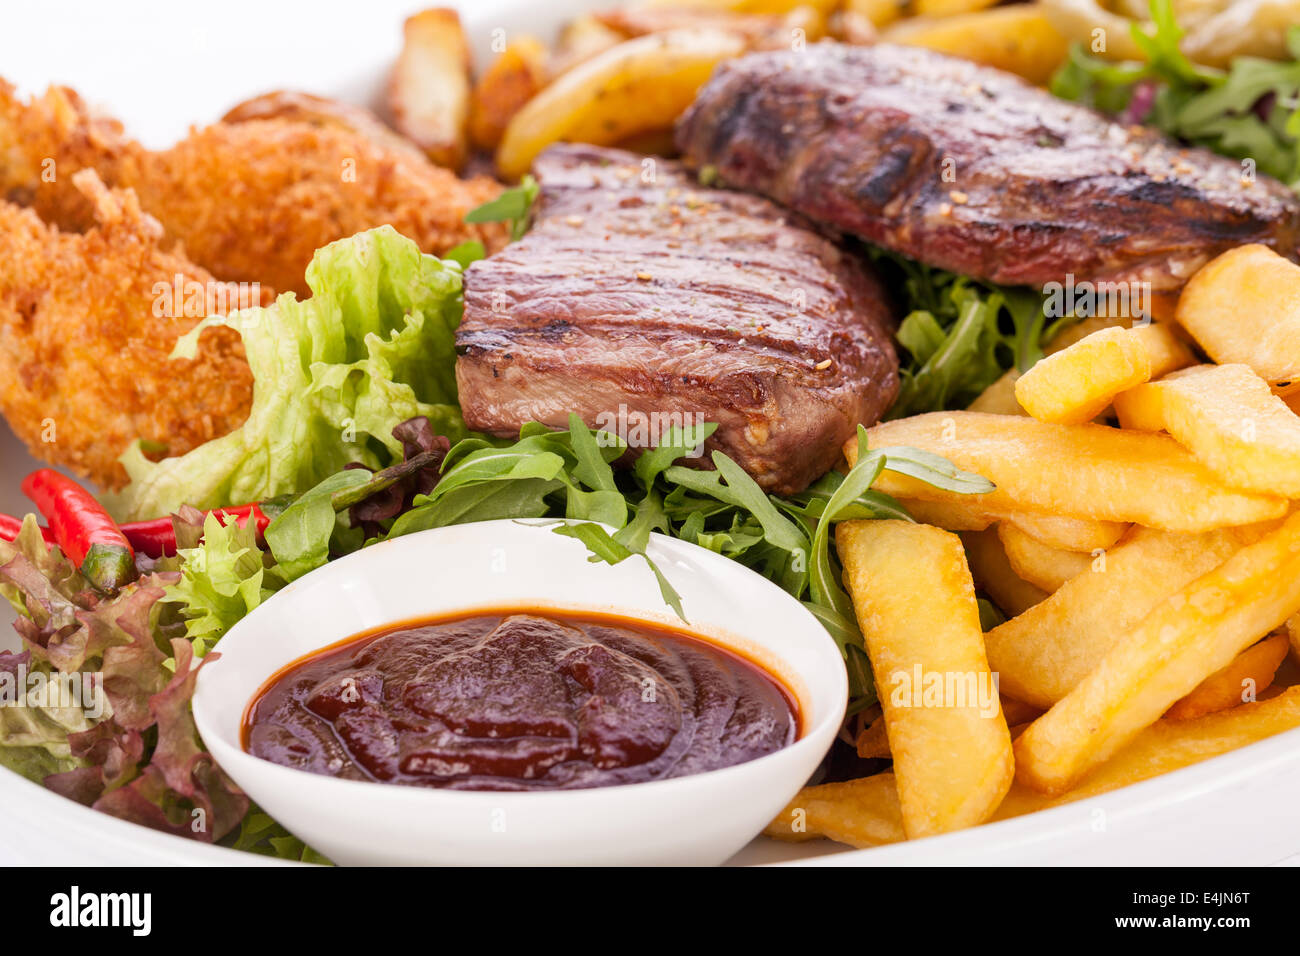 Wholesome platter of mixed meats including grilled steak, crispy crumbed chicken and beef on a bed of fresh leafy green mixed salad served with French fries and chutney or BBQ sauce in a dish Stock Photo